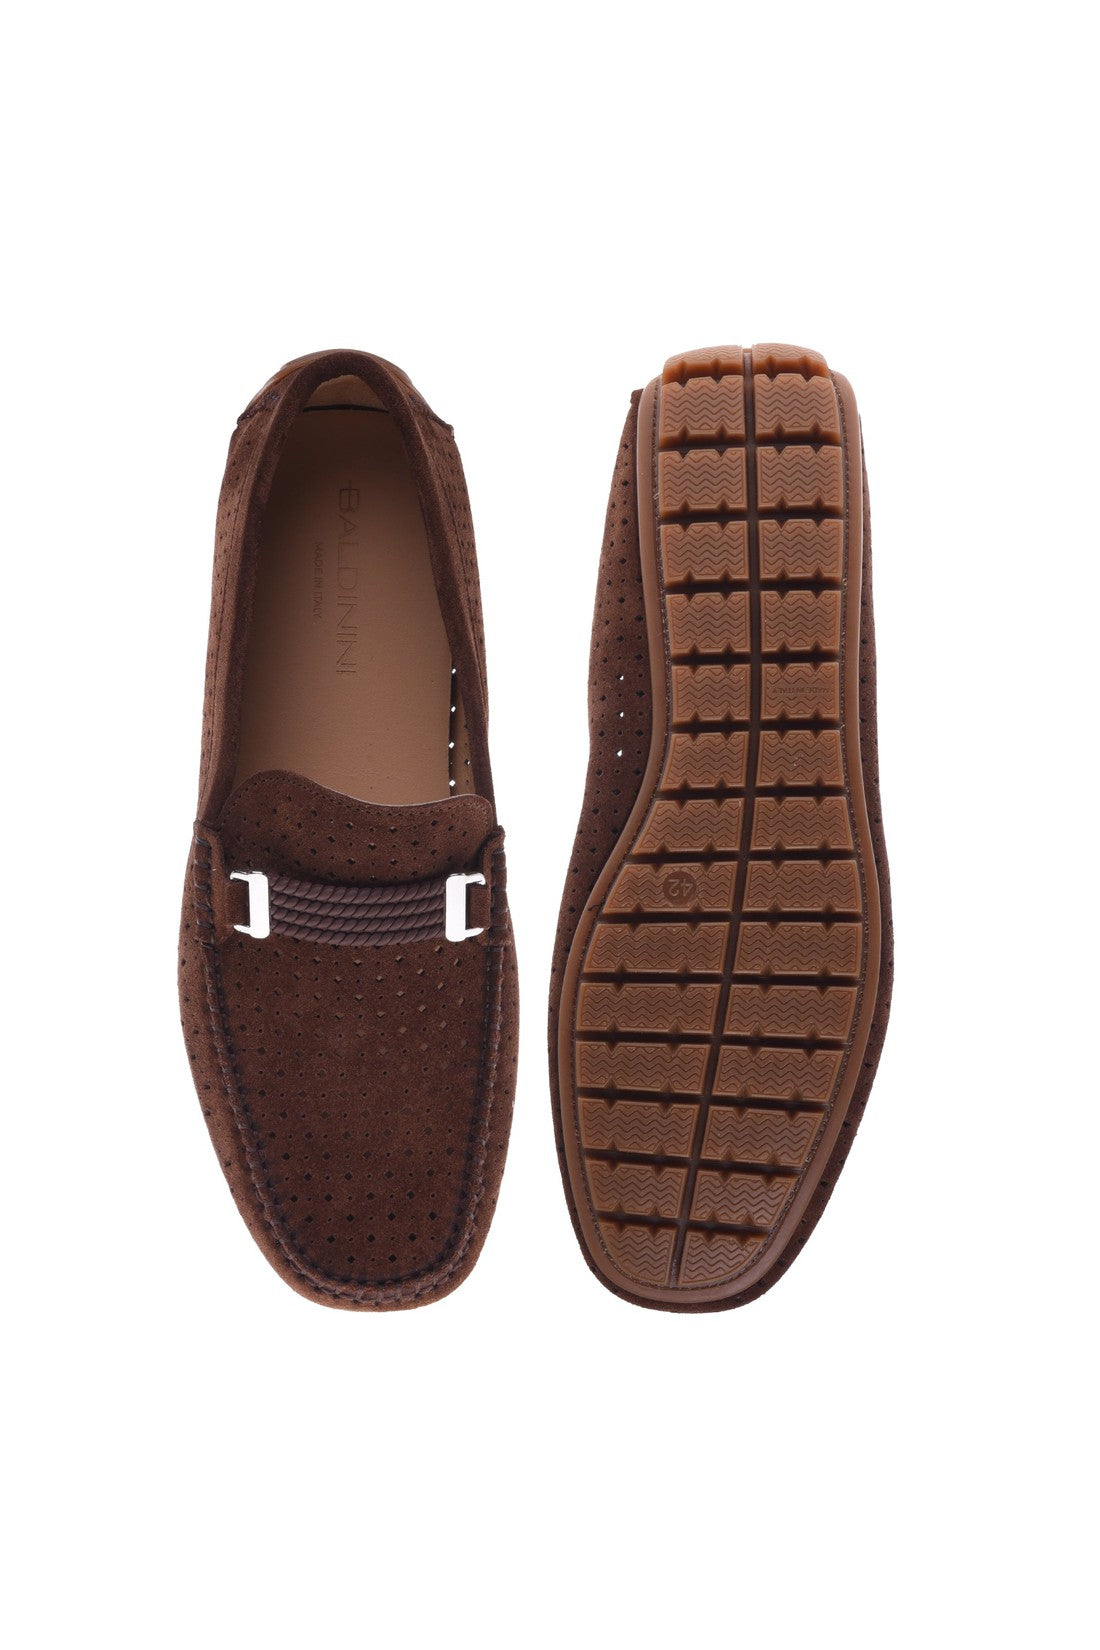 Loafer in brown perforated suede